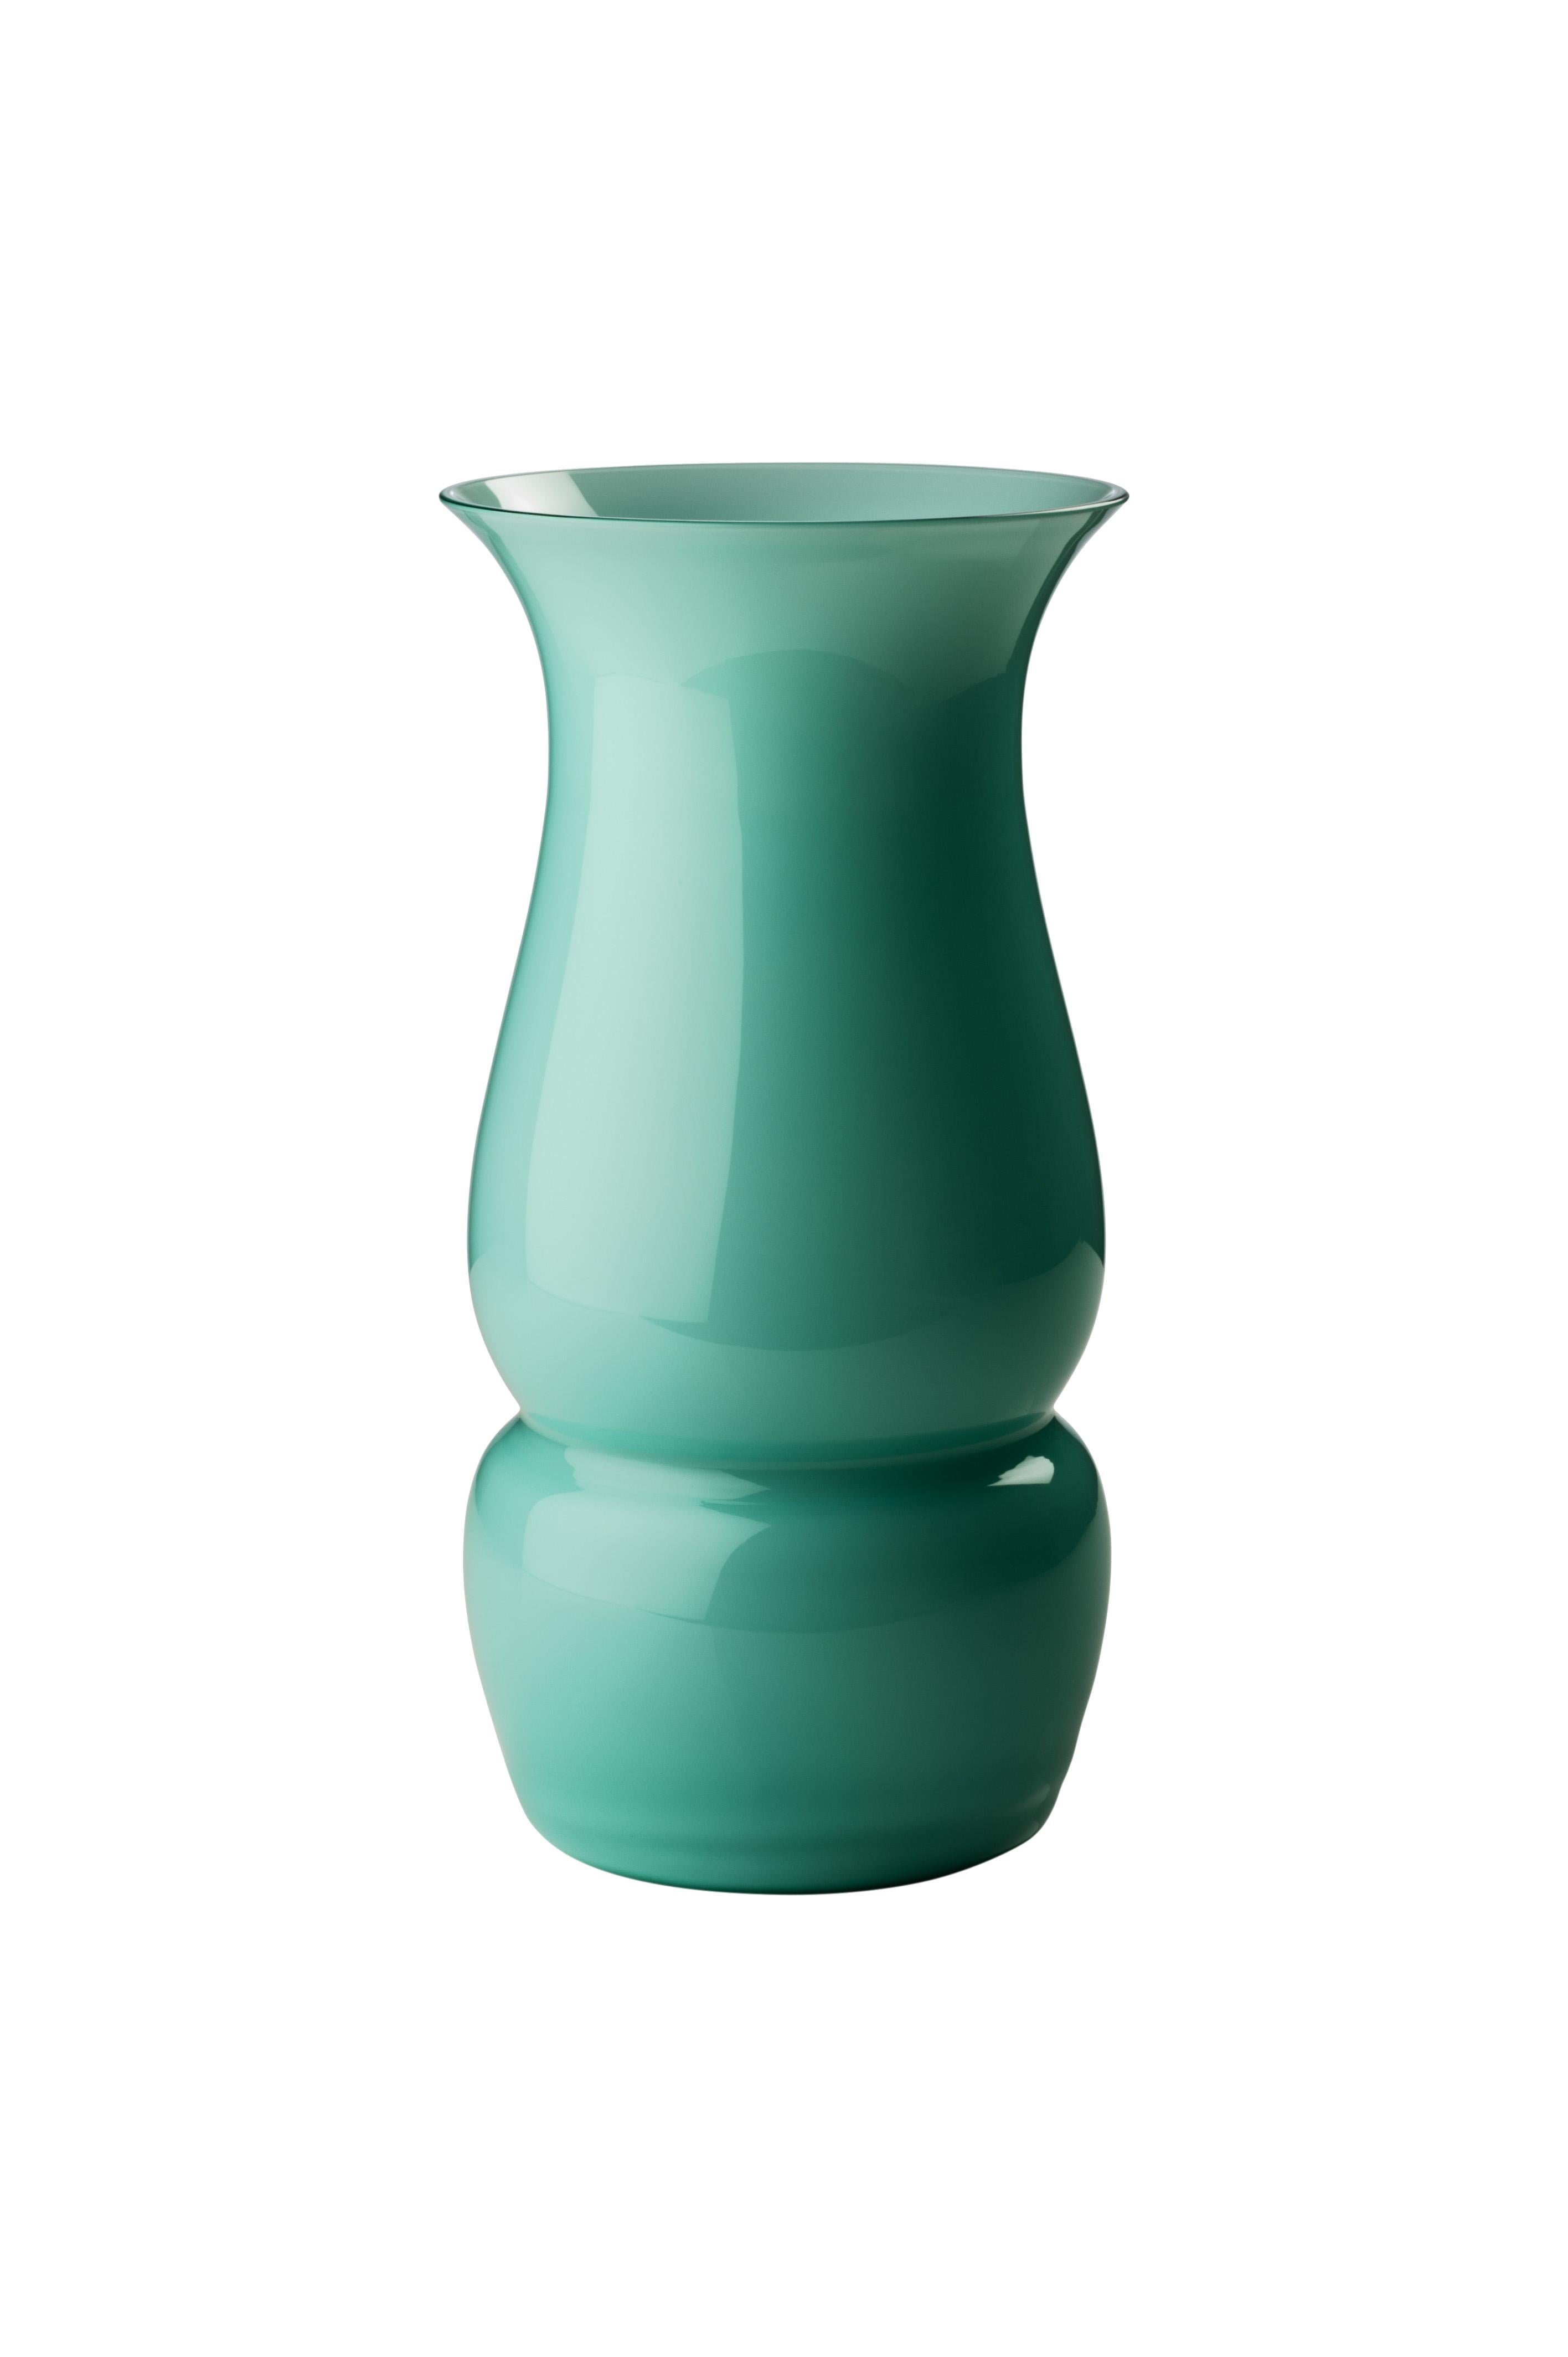 Venini glass vase with elongated body and funnel shaped neck in mint green designed by Leonardo Lanucci in 2016. Perfect for indoor home decor as container or strong statement piece for any room. Also available in other colors on